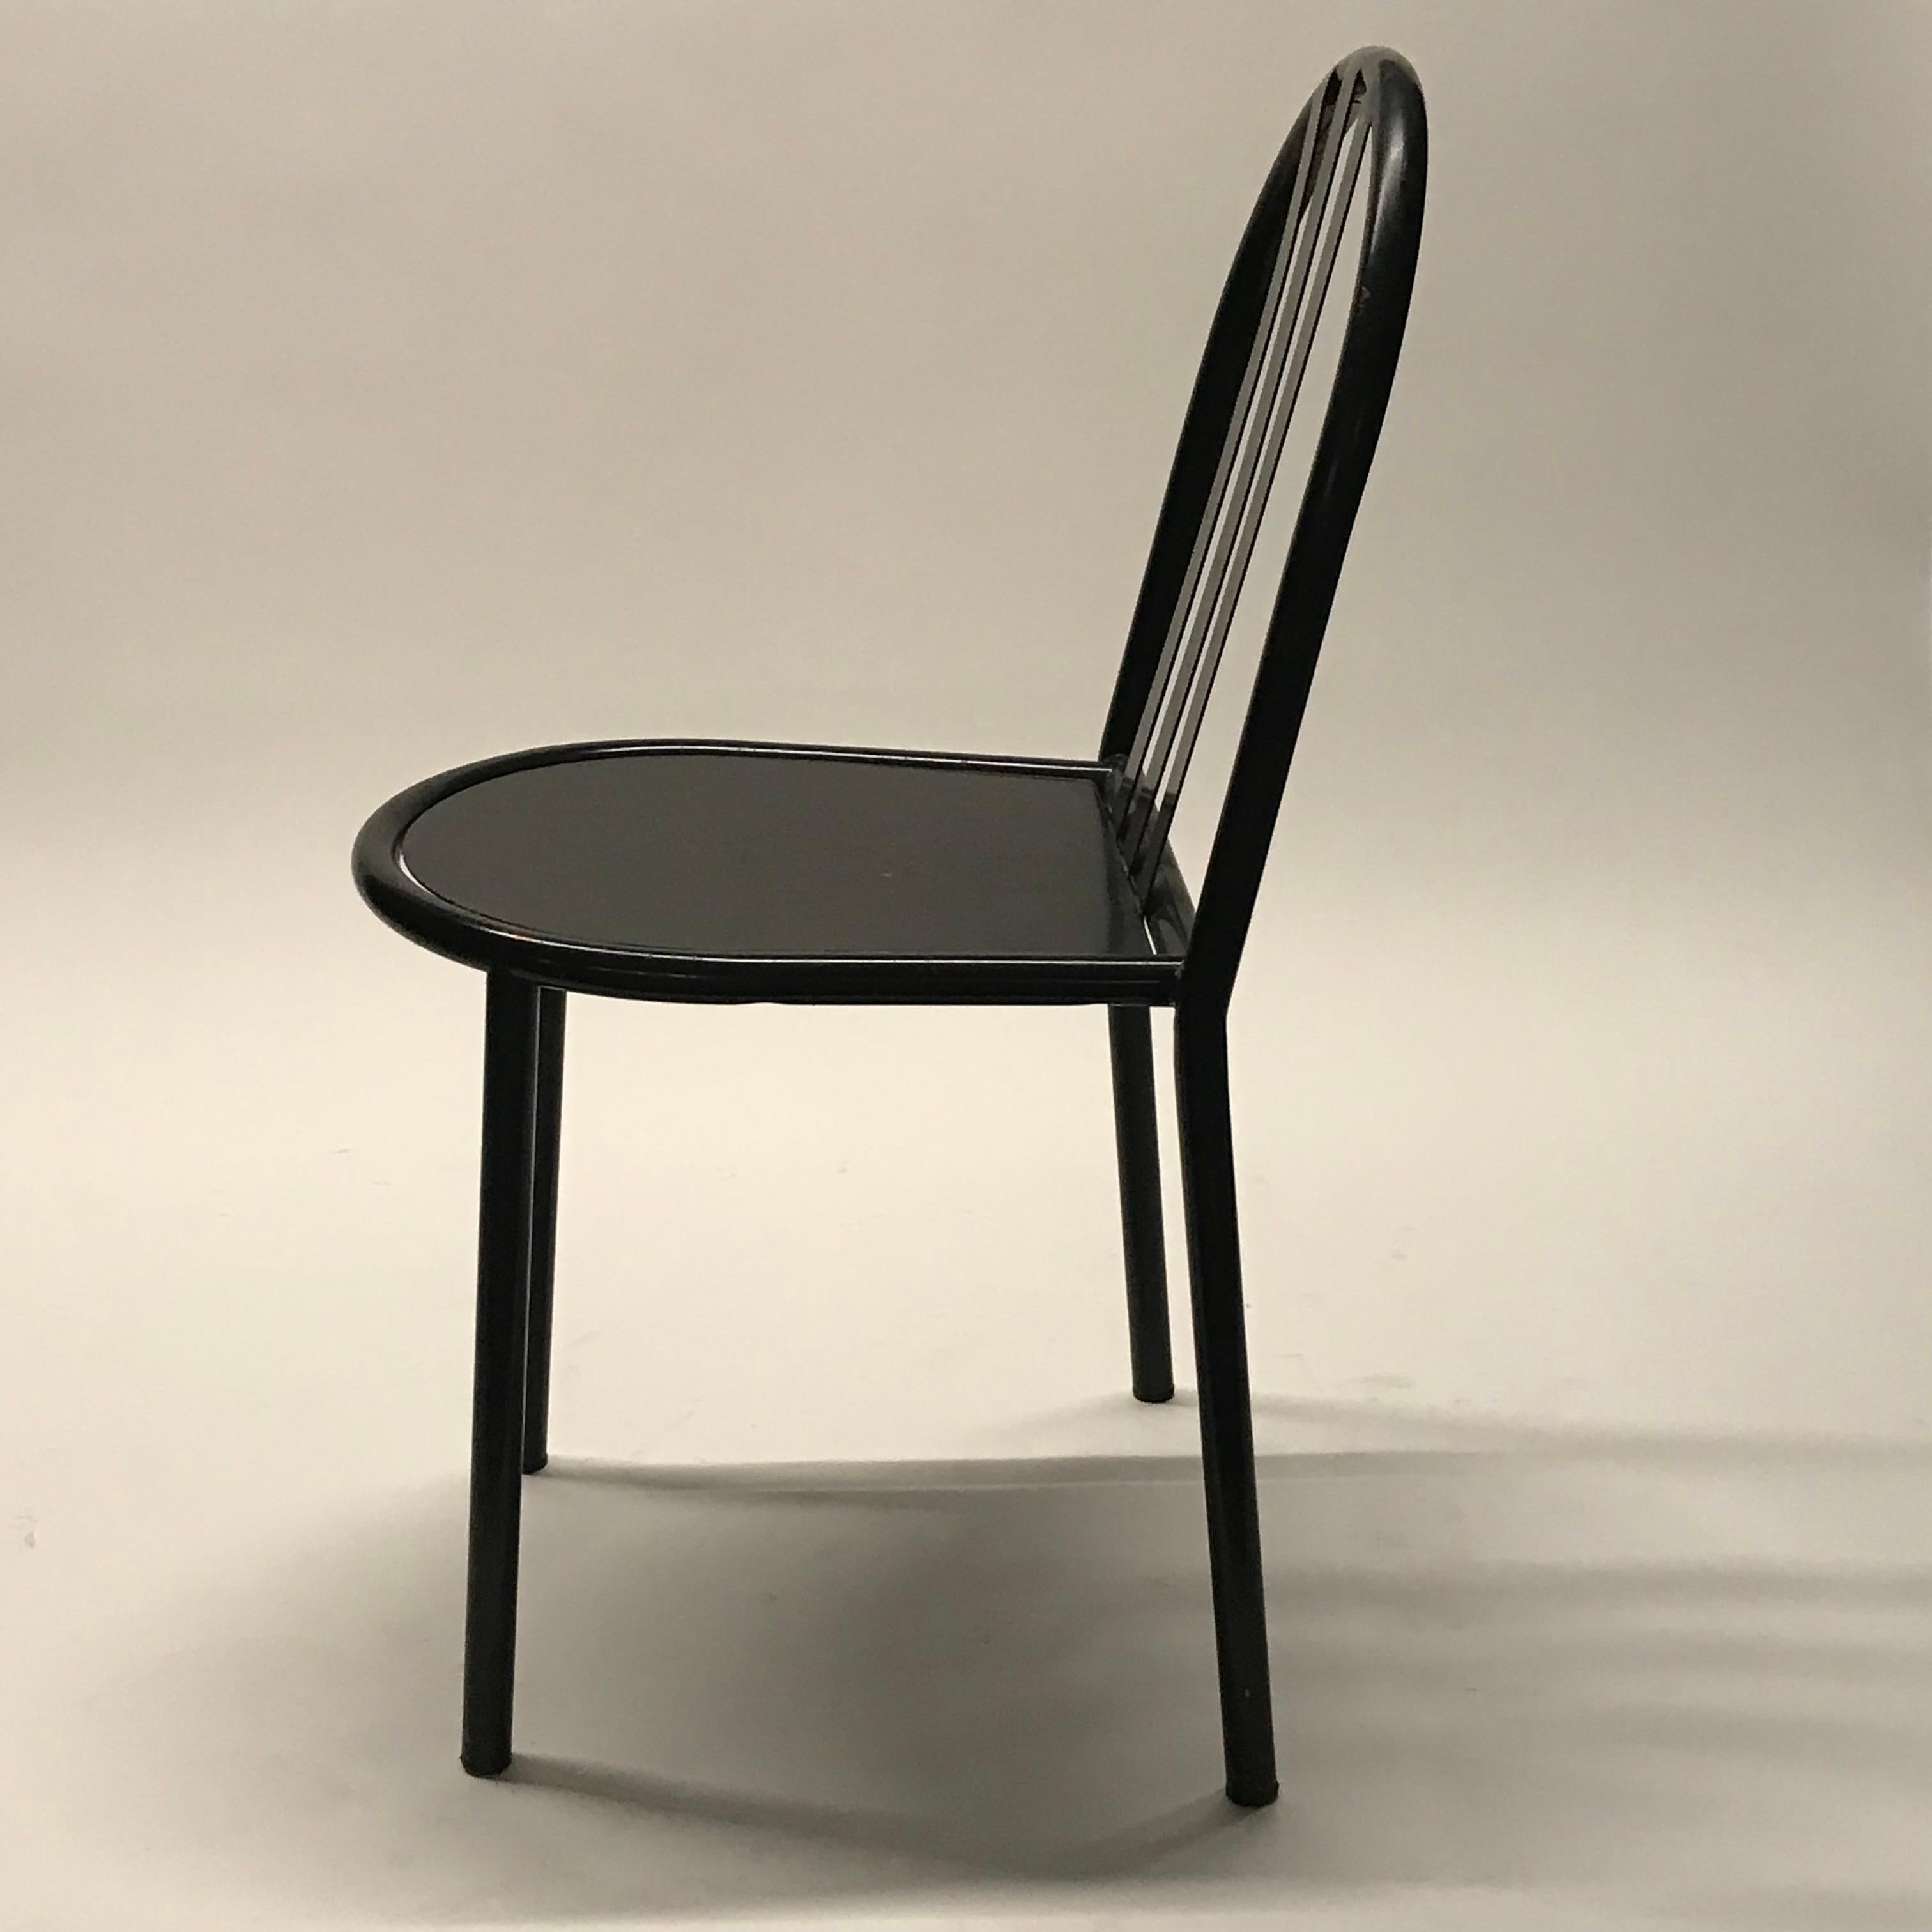 Late 20th Century Robert Malet Stevens Stacking No.222 Chair Pair in Original Gloss Black Finish